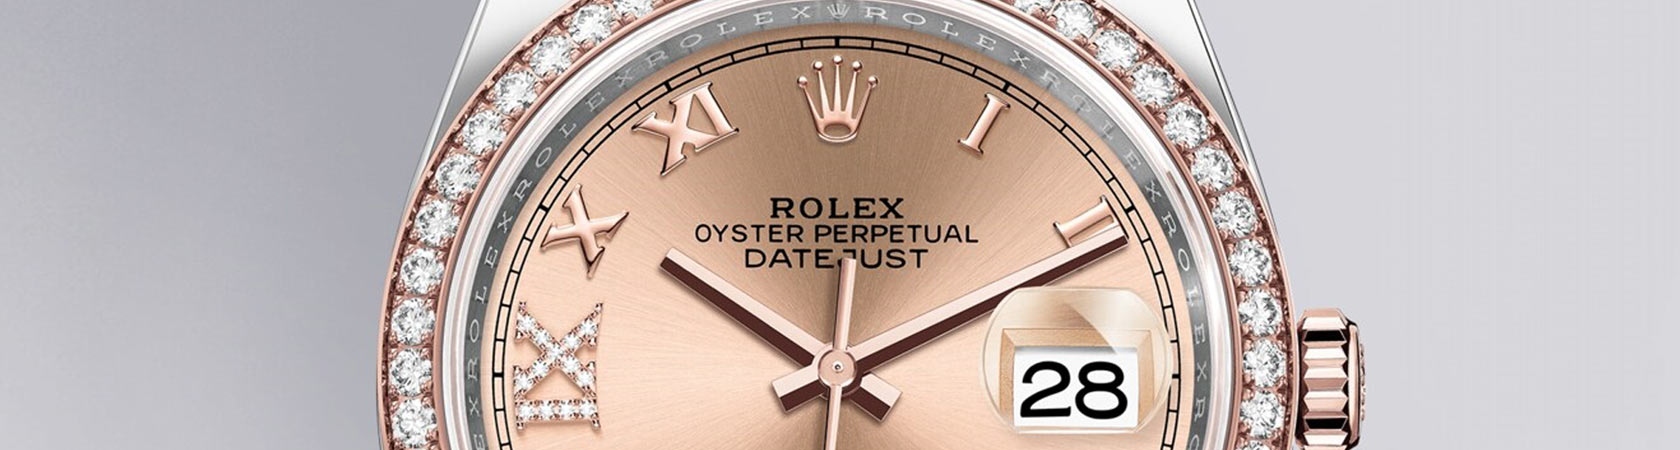 Rolex Oyster Perpetual Datejust 36 In Everose Rolesor - Kee Hing Hung